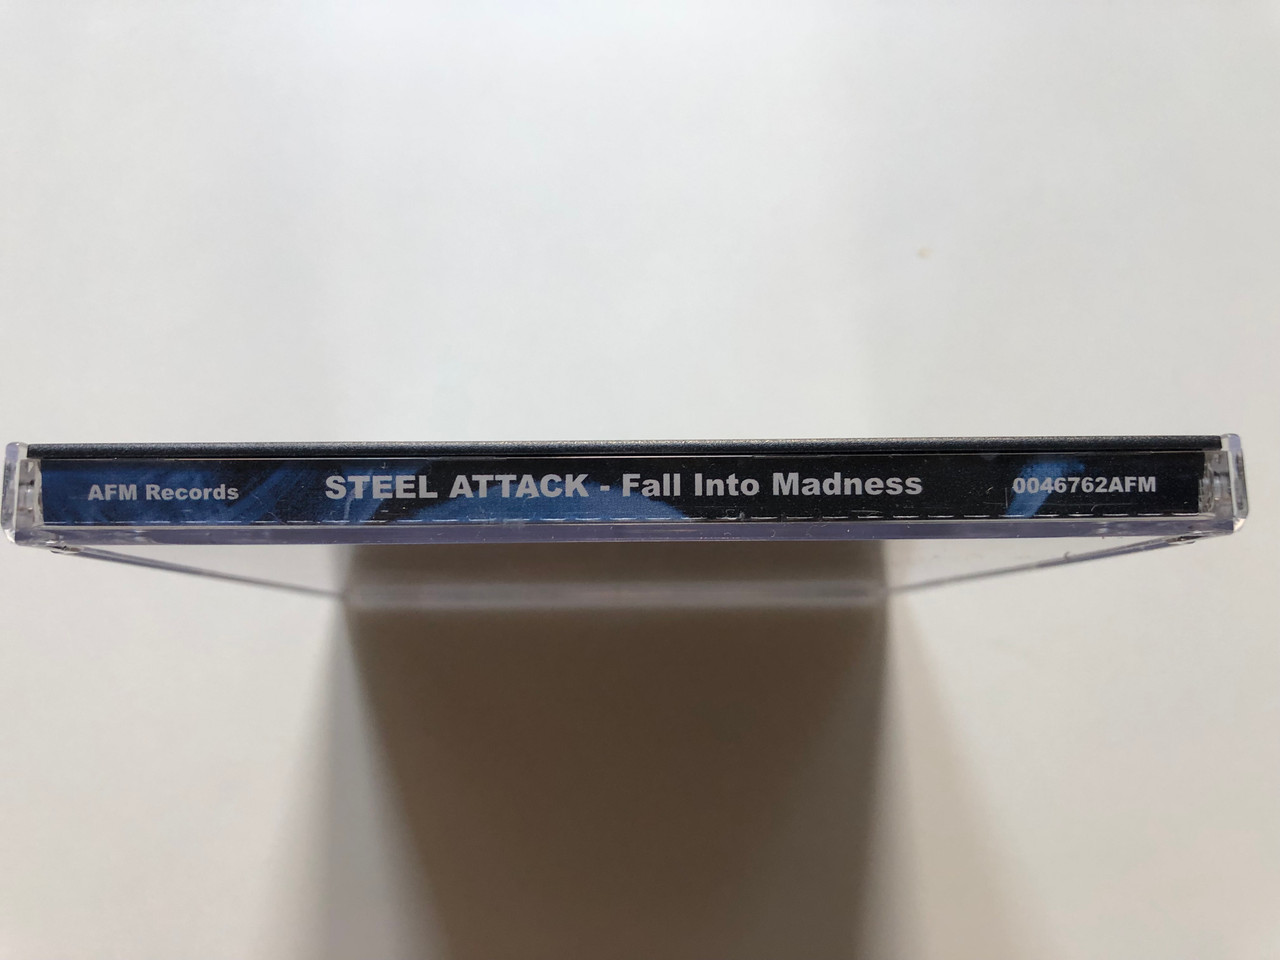 https://cdn10.bigcommerce.com/s-62bdpkt7pb/products/0/images/307531/Steel_Attack_Fall_Into_Madness_AFM_Records_Audio_CD_2001_0046762AFM_3__65869.1698737943.1280.1280.JPG?c=2